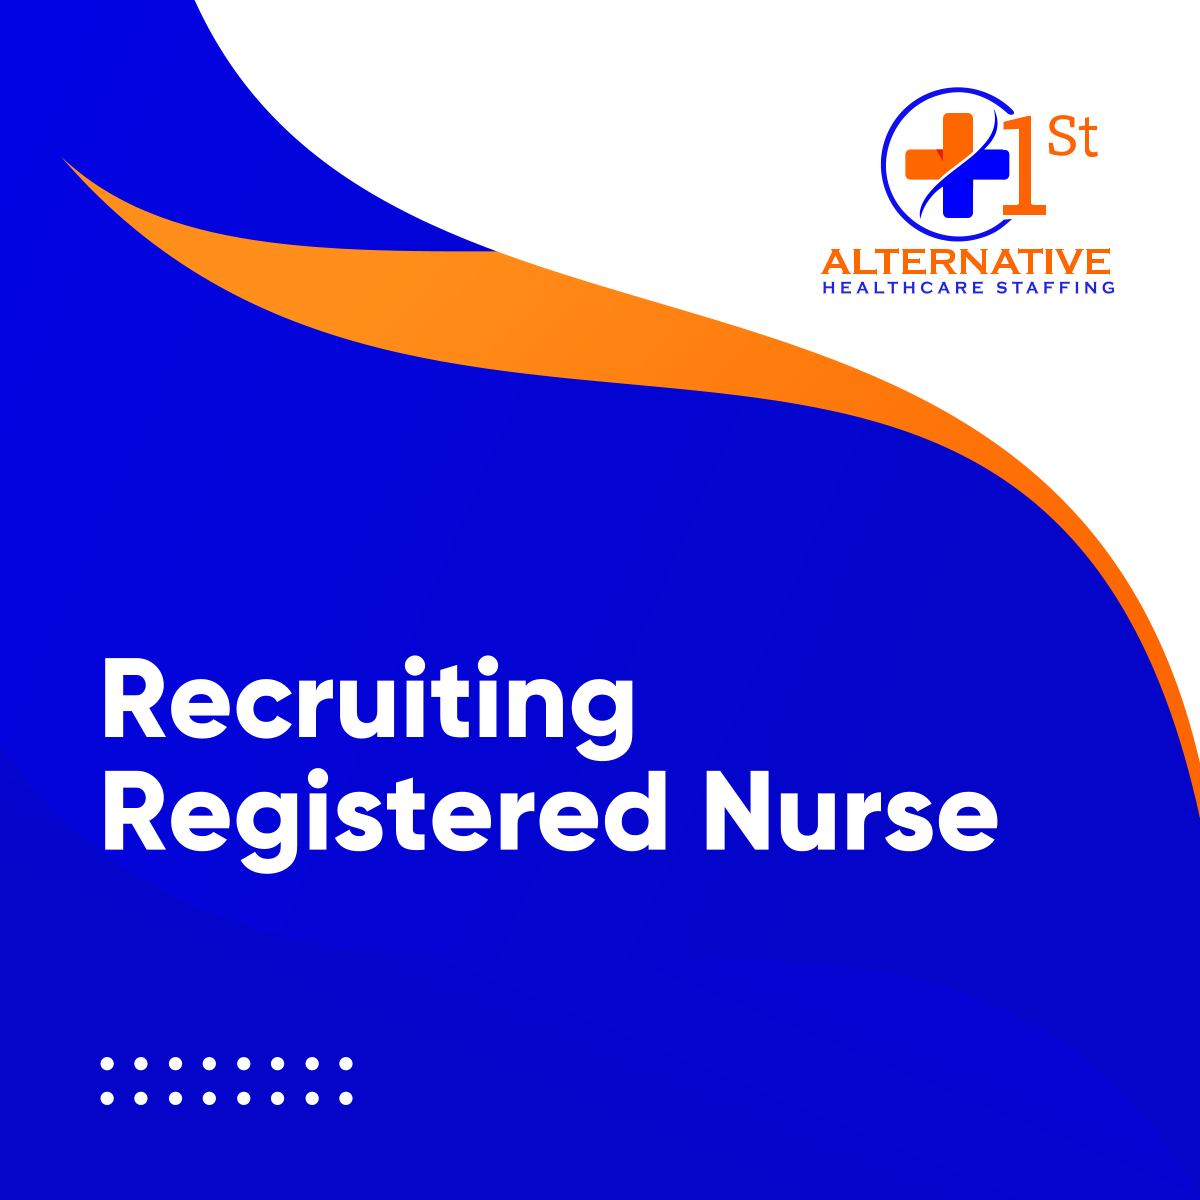 Are you a Registered Nurse looking for a new opportunity? Join our team at 1st Alternative Healthcare Staffing LLC and make a difference in the lives of patients.

Apply now!

#RegisteredNurse #JobOpportunity #HealthcareStaffing #LynnMA #1stAlternativeHealthcareStaffingLLC